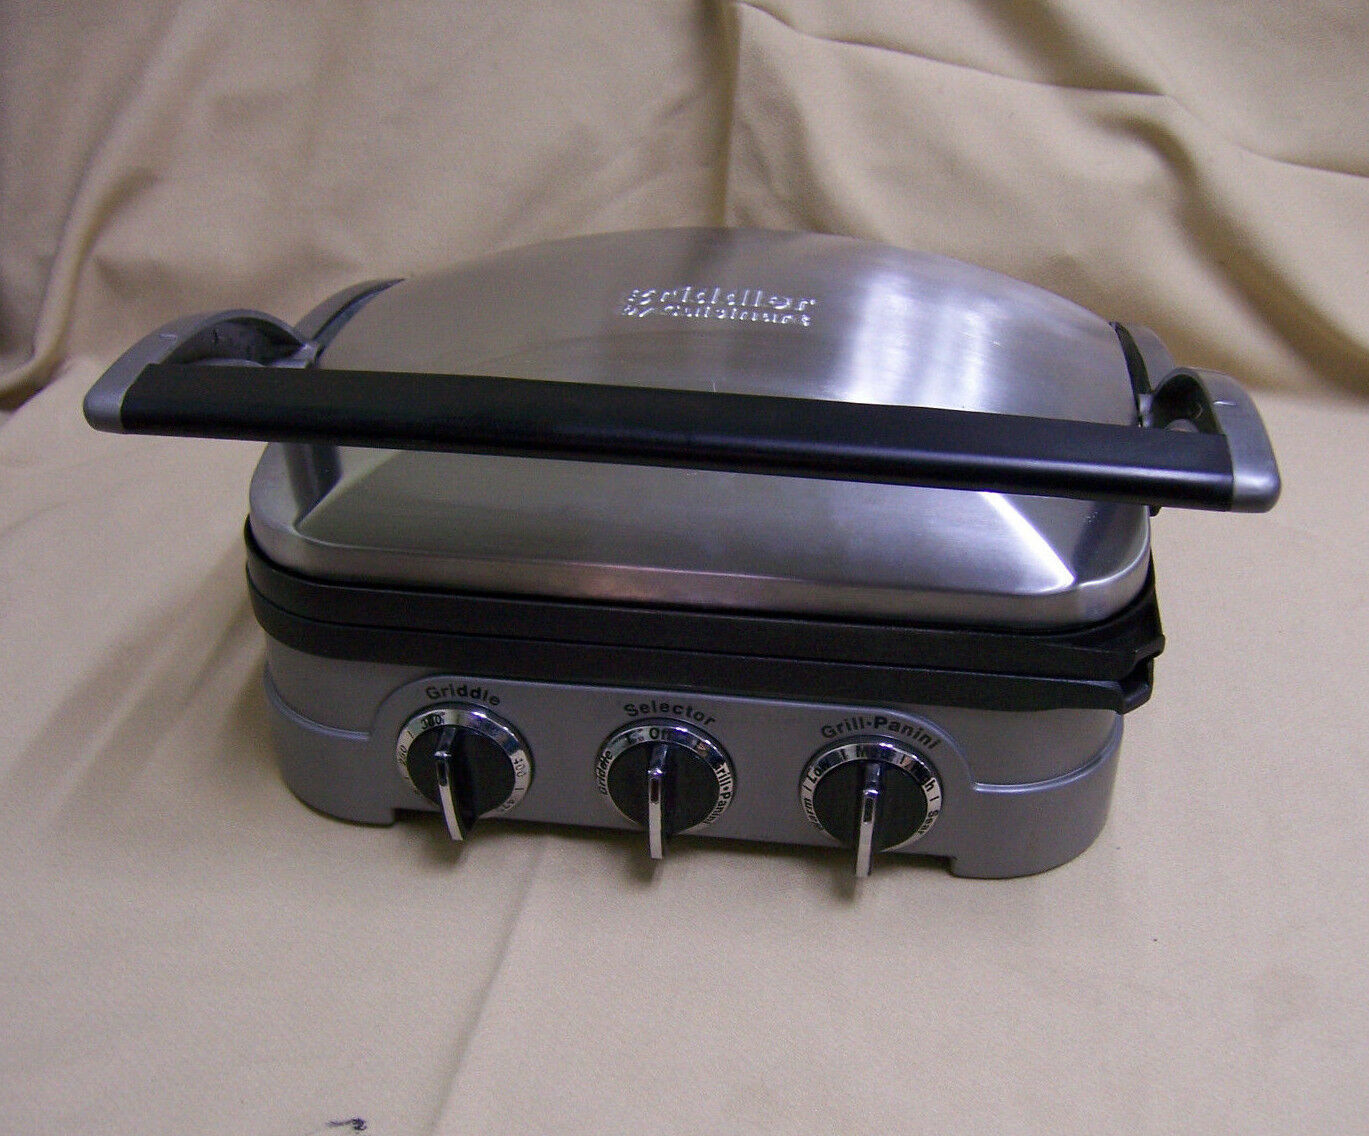 Cuisinart GR-4 Griddler with Flat Griddle and 11 similar items